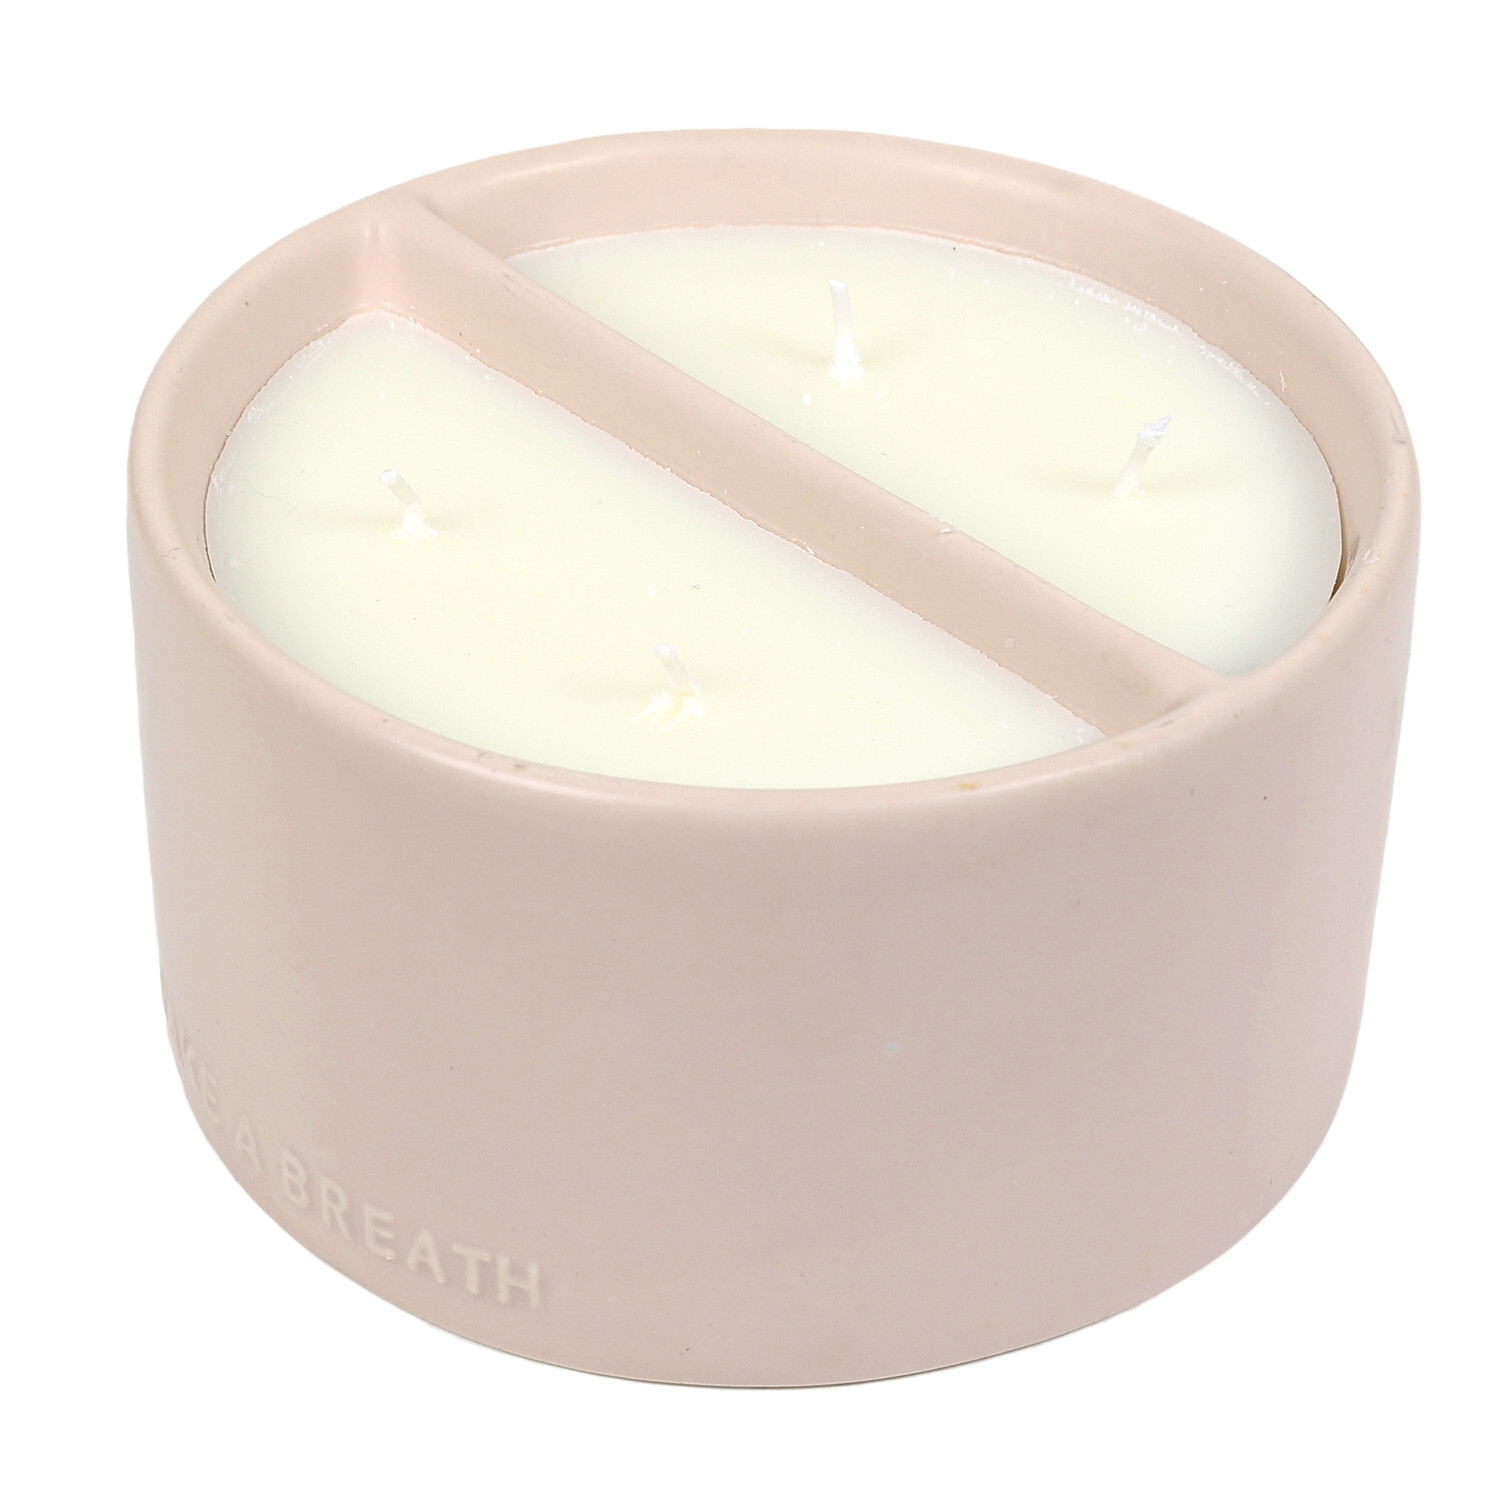 Single Wood and Vanilla Duo Scented Candle in Assorted styles Image 4